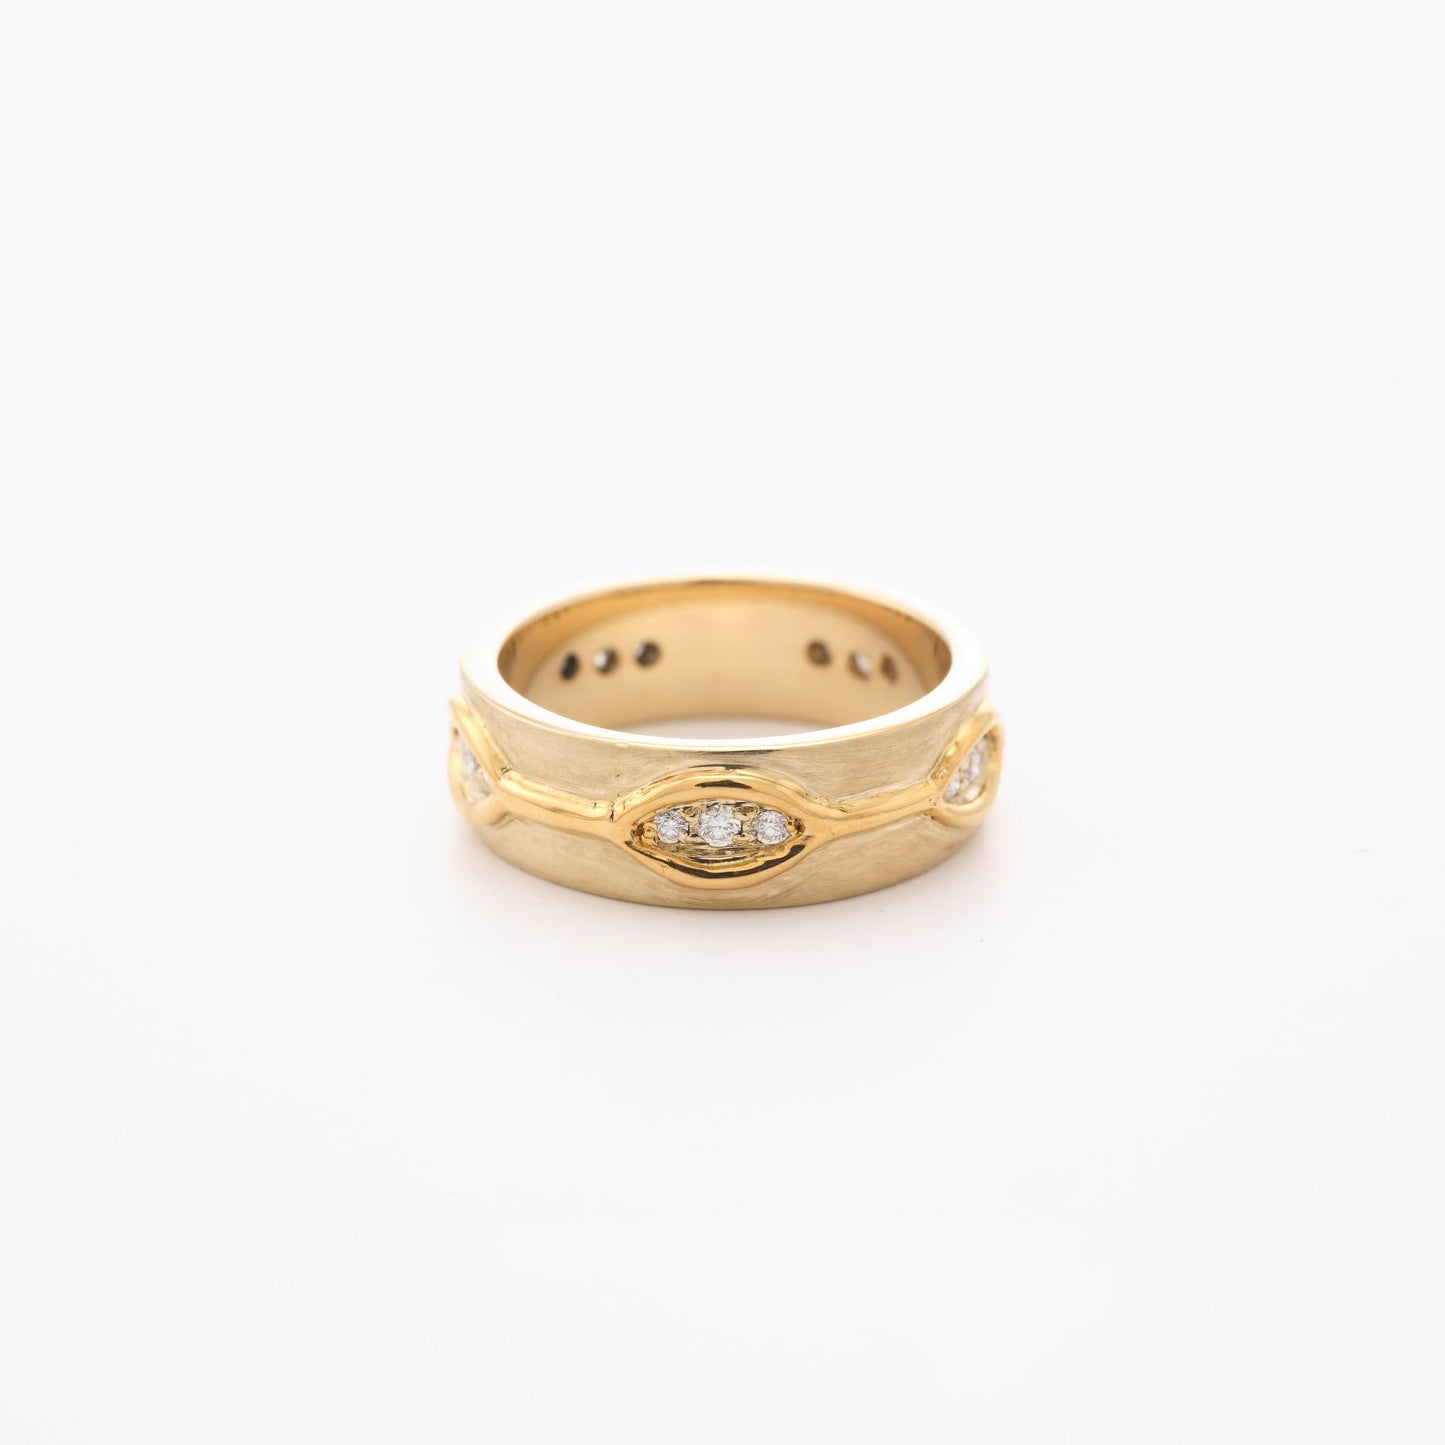 The Chithra Gold and Diamond Ring by Rasvihar